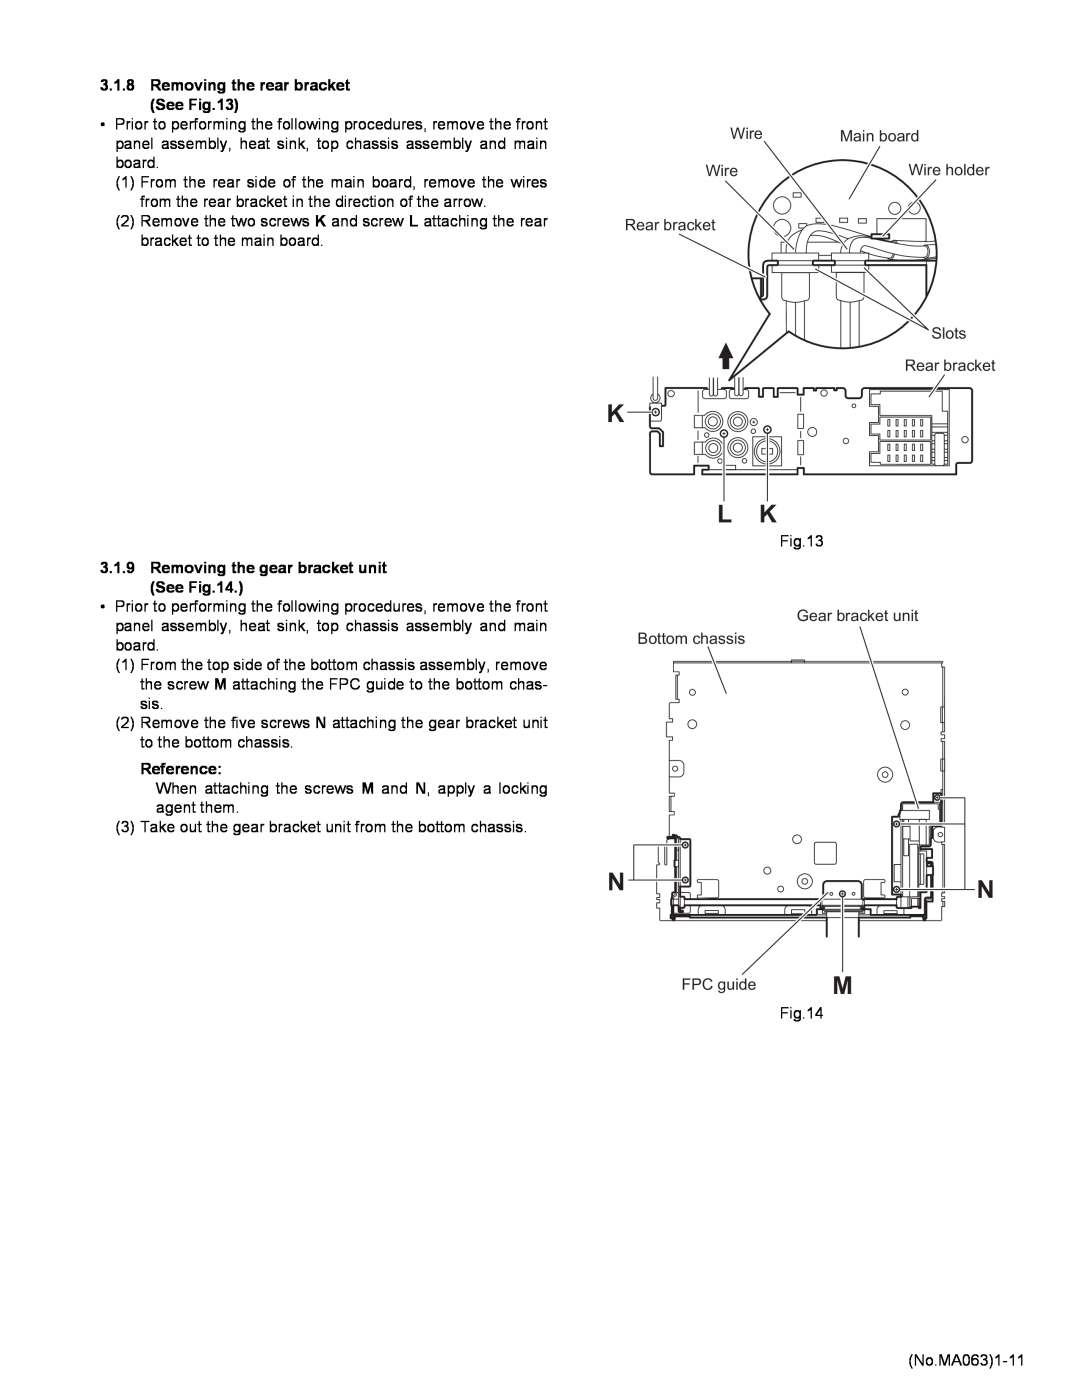 JVC KD-LH401 service manual K L K, Removing the rear bracket See, Removing the gear bracket unit See, Reference, FPC guide 